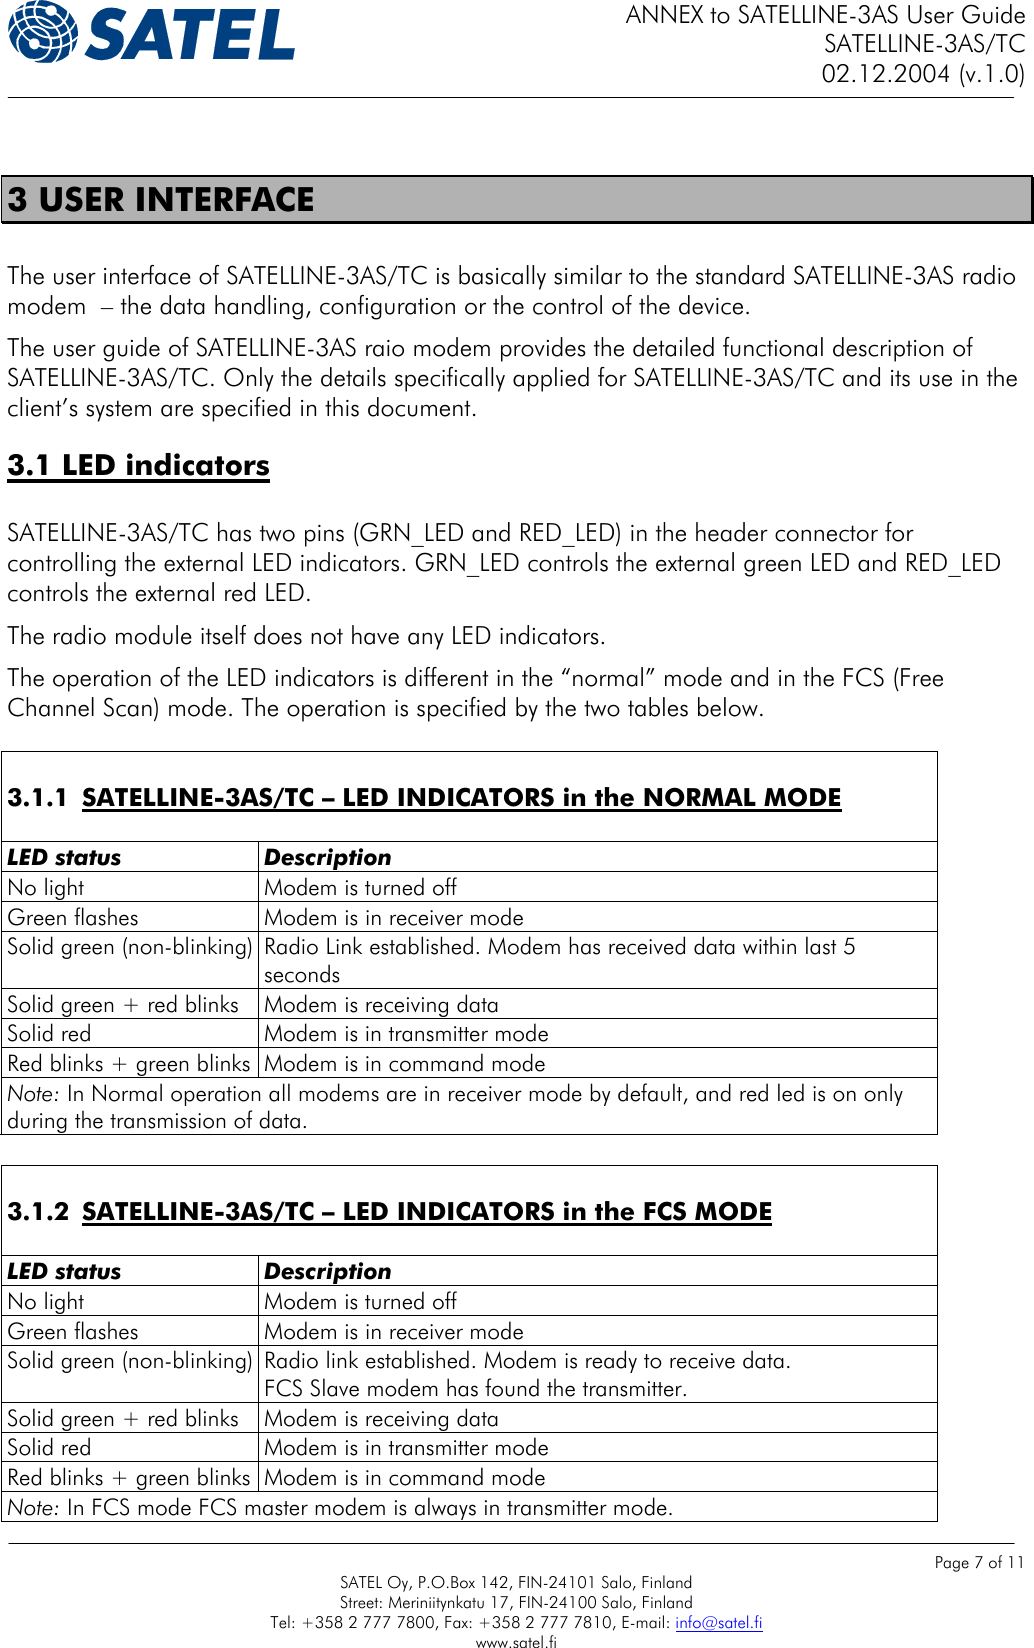 ANNEX to SATELLINE-3AS User Guide SATELLINE-3AS/TC 02.12.2004 (v.1.0)    Page 7 of 11 SATEL Oy, P.O.Box 142, FIN-24101 Salo, Finland Street: Meriniitynkatu 17, FIN-24100 Salo, Finland Tel: +358 2 777 7800, Fax: +358 2 777 7810, E-mail: info@satel.fi www.satel.fi  3 USER INTERFACE  The user interface of SATELLINE-3AS/TC is basically similar to the standard SATELLINE-3AS radio modem  – the data handling, configuration or the control of the device. The user guide of SATELLINE-3AS raio modem provides the detailed functional description of SATELLINE-3AS/TC. Only the details specifically applied for SATELLINE-3AS/TC and its use in the client’s system are specified in this document.   3.1 LED indicators   SATELLINE-3AS/TC has two pins (GRN_LED and RED_LED) in the header connector for controlling the external LED indicators. GRN_LED controls the external green LED and RED_LED controls the external red LED. The radio module itself does not have any LED indicators. The operation of the LED indicators is different in the “normal” mode and in the FCS (Free Channel Scan) mode. The operation is specified by the two tables below.   3.1.1  SATELLINE-3AS/TC – LED INDICATORS in the NORMAL MODE  LED status  Description No light  Modem is turned off Green flashes  Modem is in receiver mode Solid green (non-blinking) Radio Link established. Modem has received data within last 5 seconds Solid green + red blinks  Modem is receiving data Solid red  Modem is in transmitter mode Red blinks + green blinks  Modem is in command mode Note: In Normal operation all modems are in receiver mode by default, and red led is on only during the transmission of data.   3.1.2  SATELLINE-3AS/TC – LED INDICATORS in the FCS MODE  LED status  Description No light  Modem is turned off Green flashes  Modem is in receiver mode Solid green (non-blinking) Radio link established. Modem is ready to receive data.  FCS Slave modem has found the transmitter. Solid green + red blinks  Modem is receiving data Solid red  Modem is in transmitter mode Red blinks + green blinks  Modem is in command mode Note: In FCS mode FCS master modem is always in transmitter mode. 